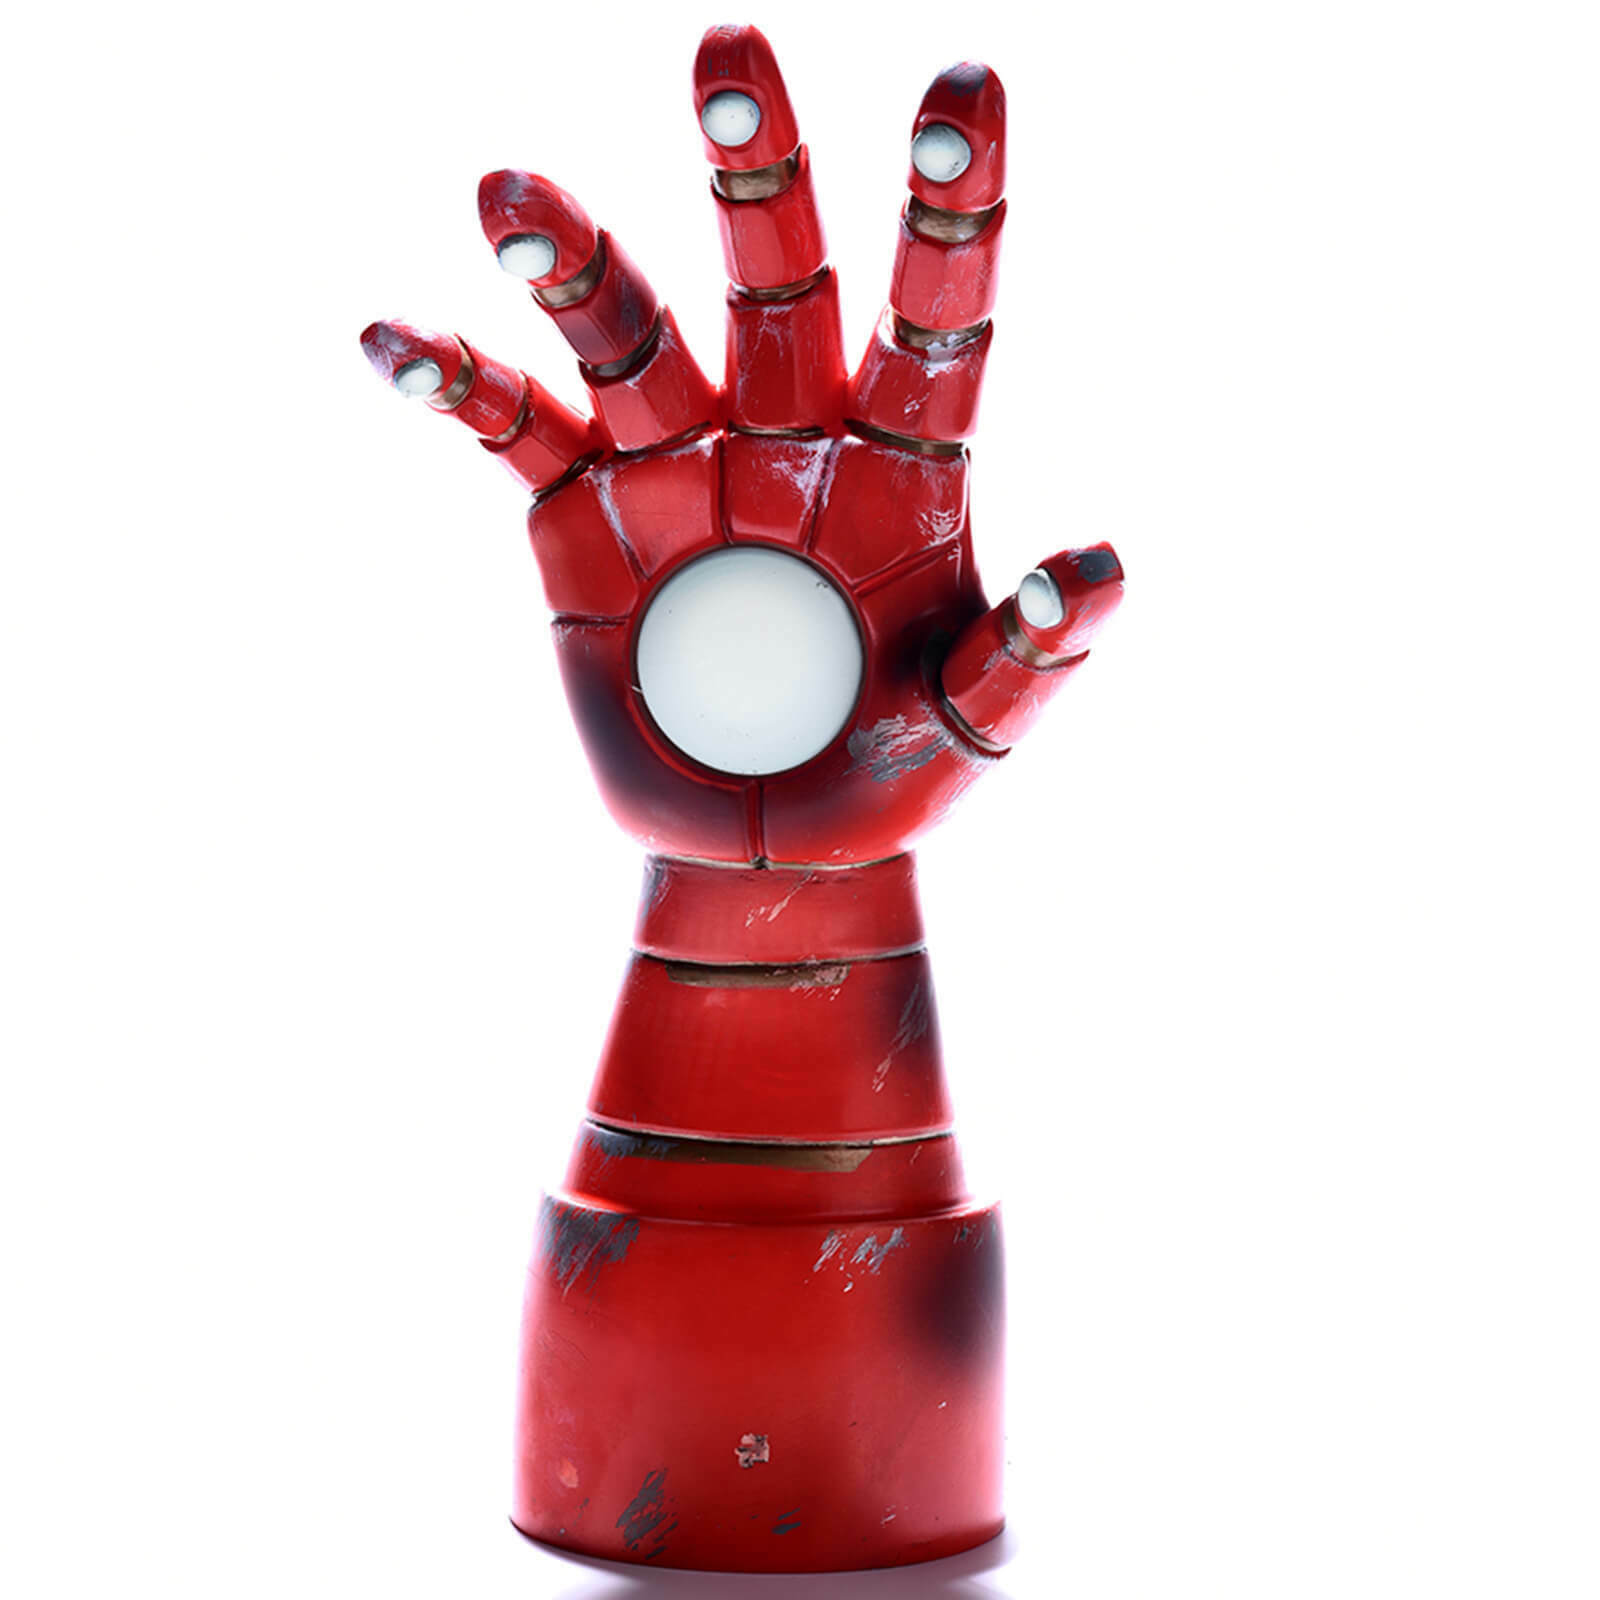 Iron Man Arm Led Table Desk Lamp Red The Avengers  14"